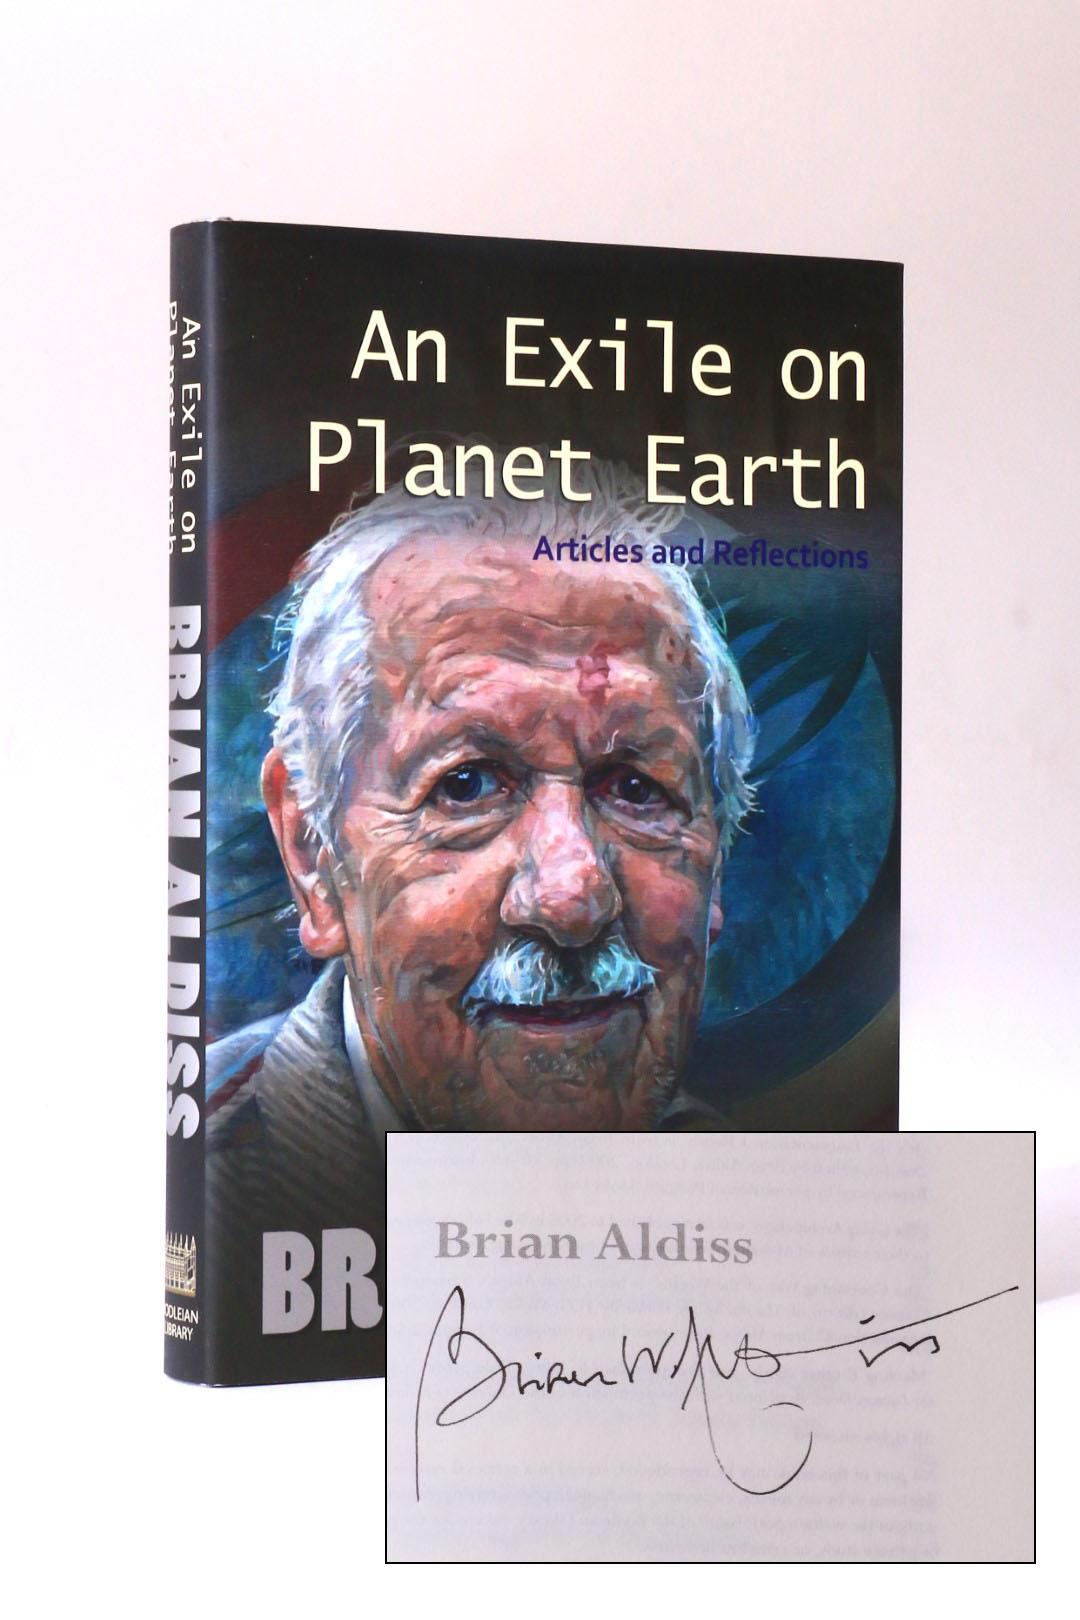 Brian Aldiss - An Exile on Planet Earth: Articles and Reflections. - Bodleian Library, 2012, Signed First Edition.